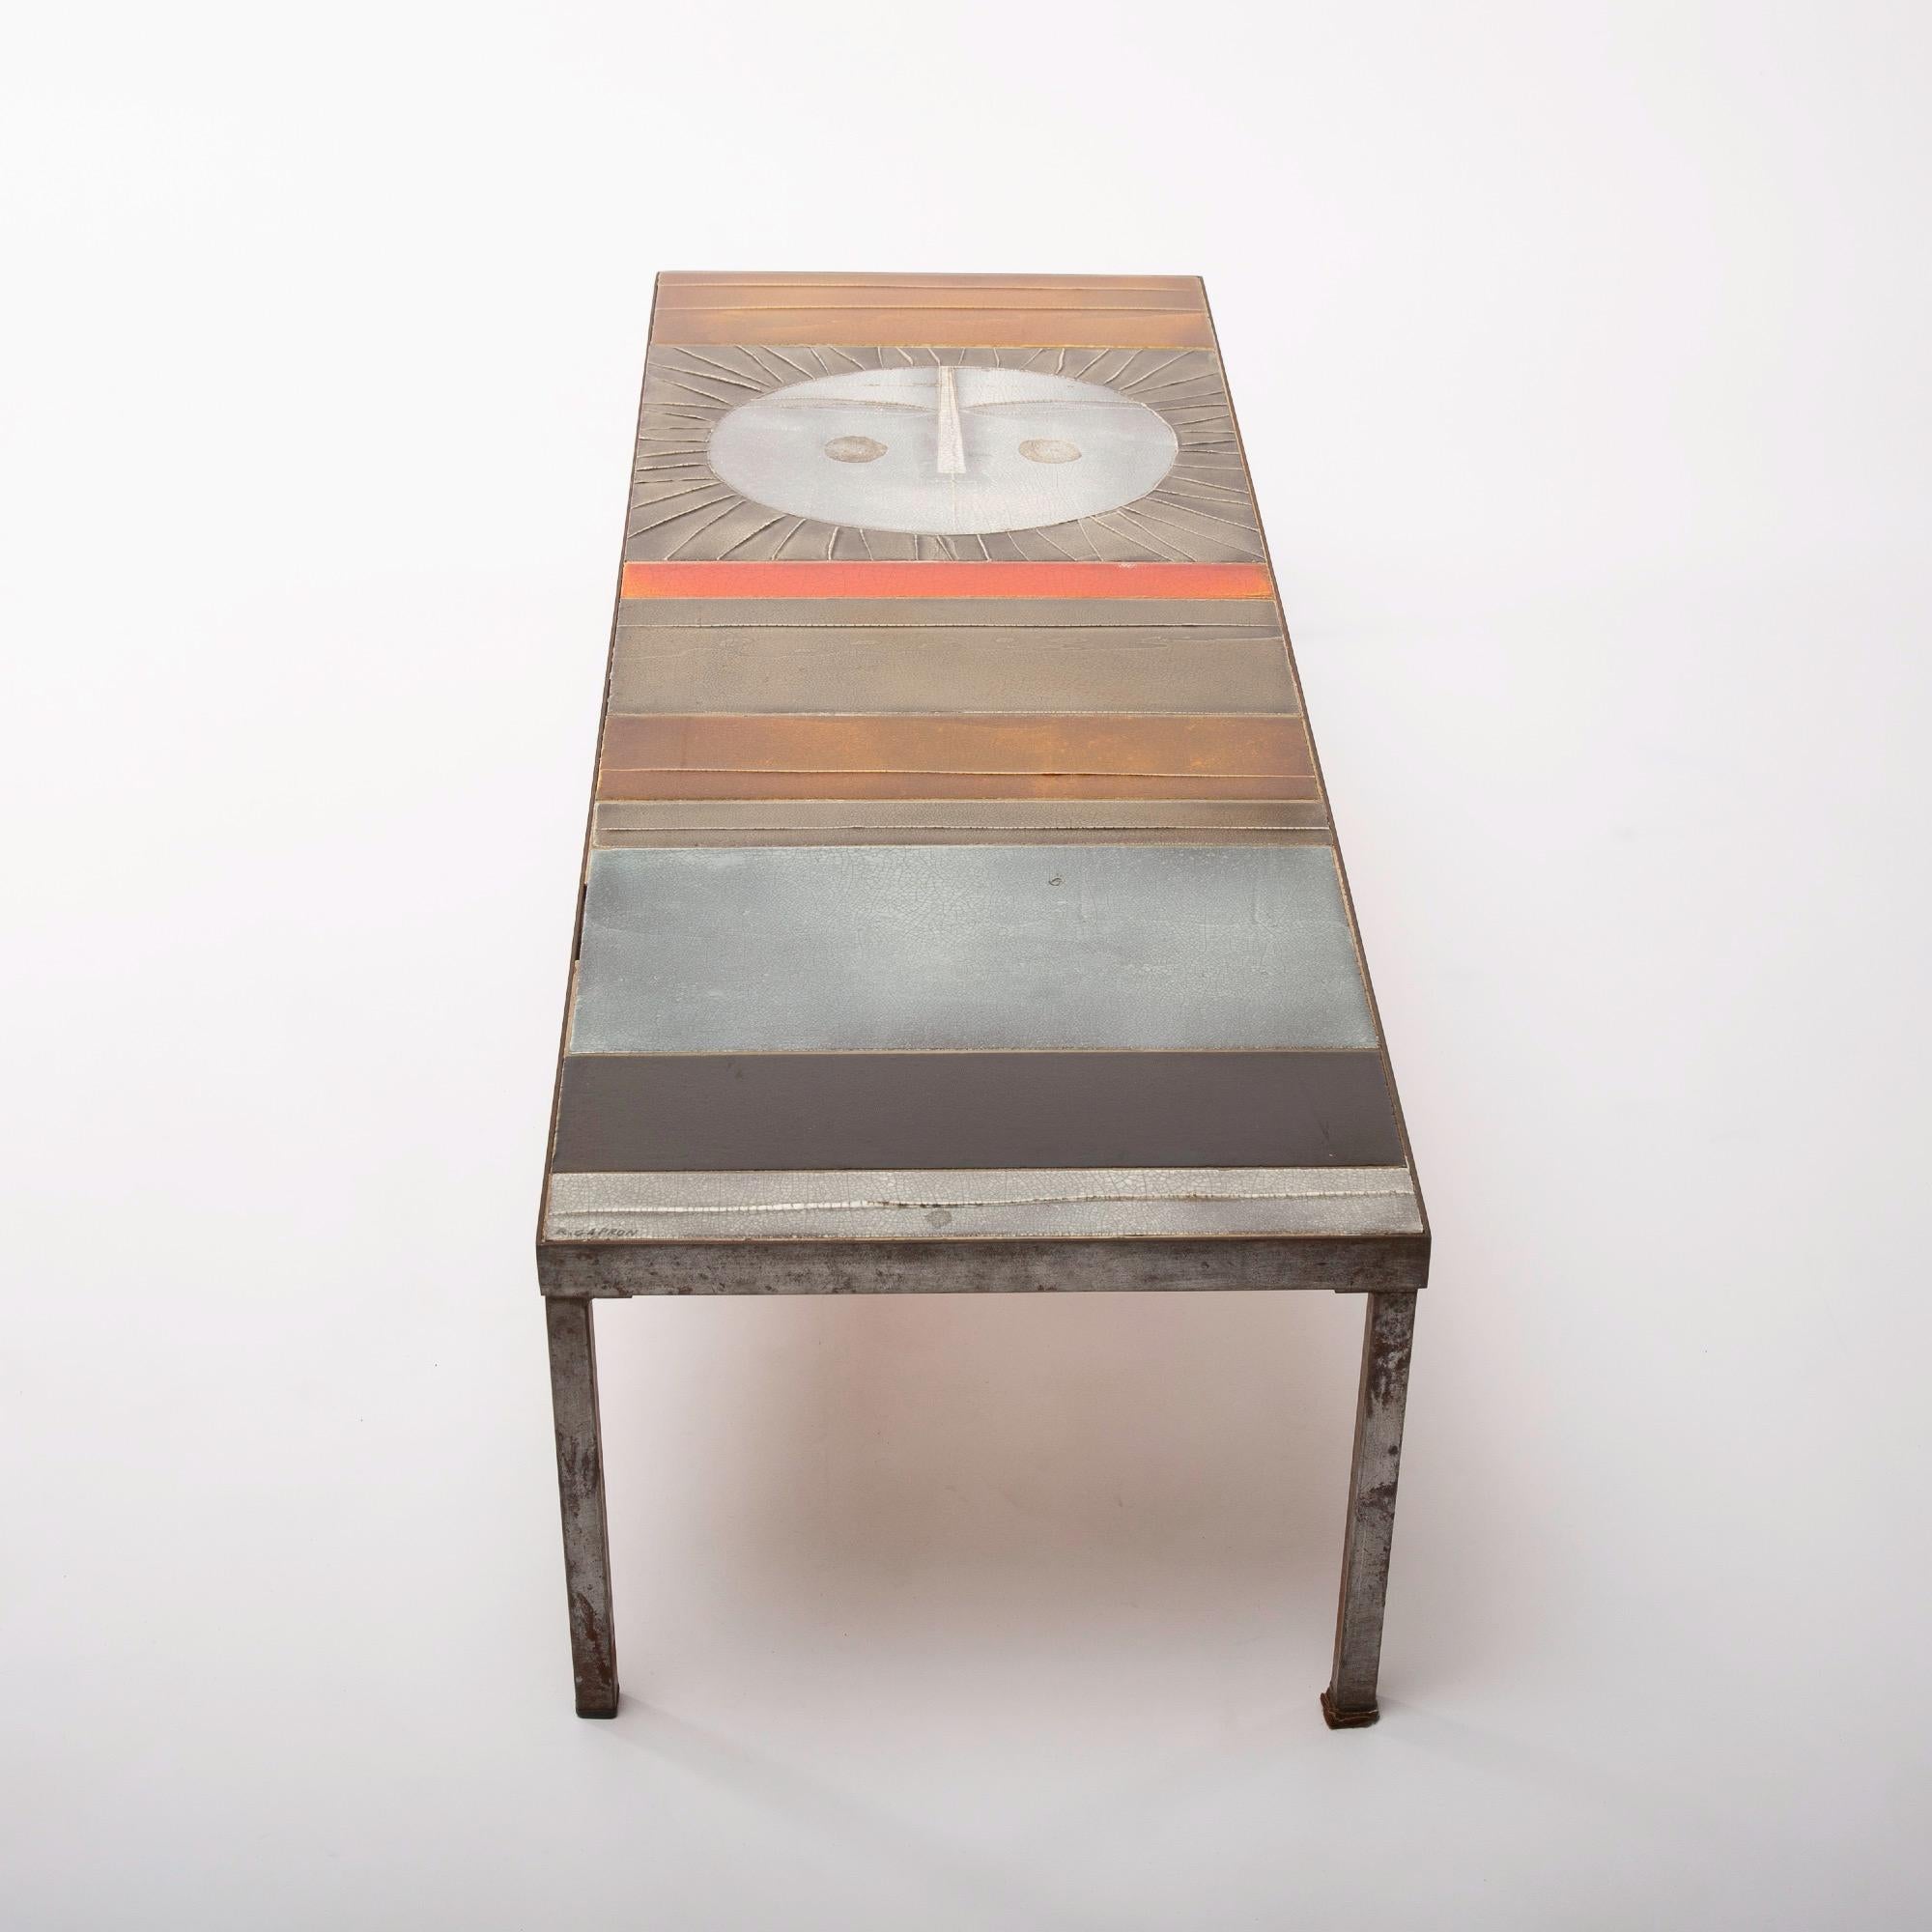 Exceptional table composed of a steel structure covered with abstract ceramics, one of which is a radiant sun. This is the largest version of the model.
An iconic piece of one of the greatest French ceramists of the post-war period,
circa